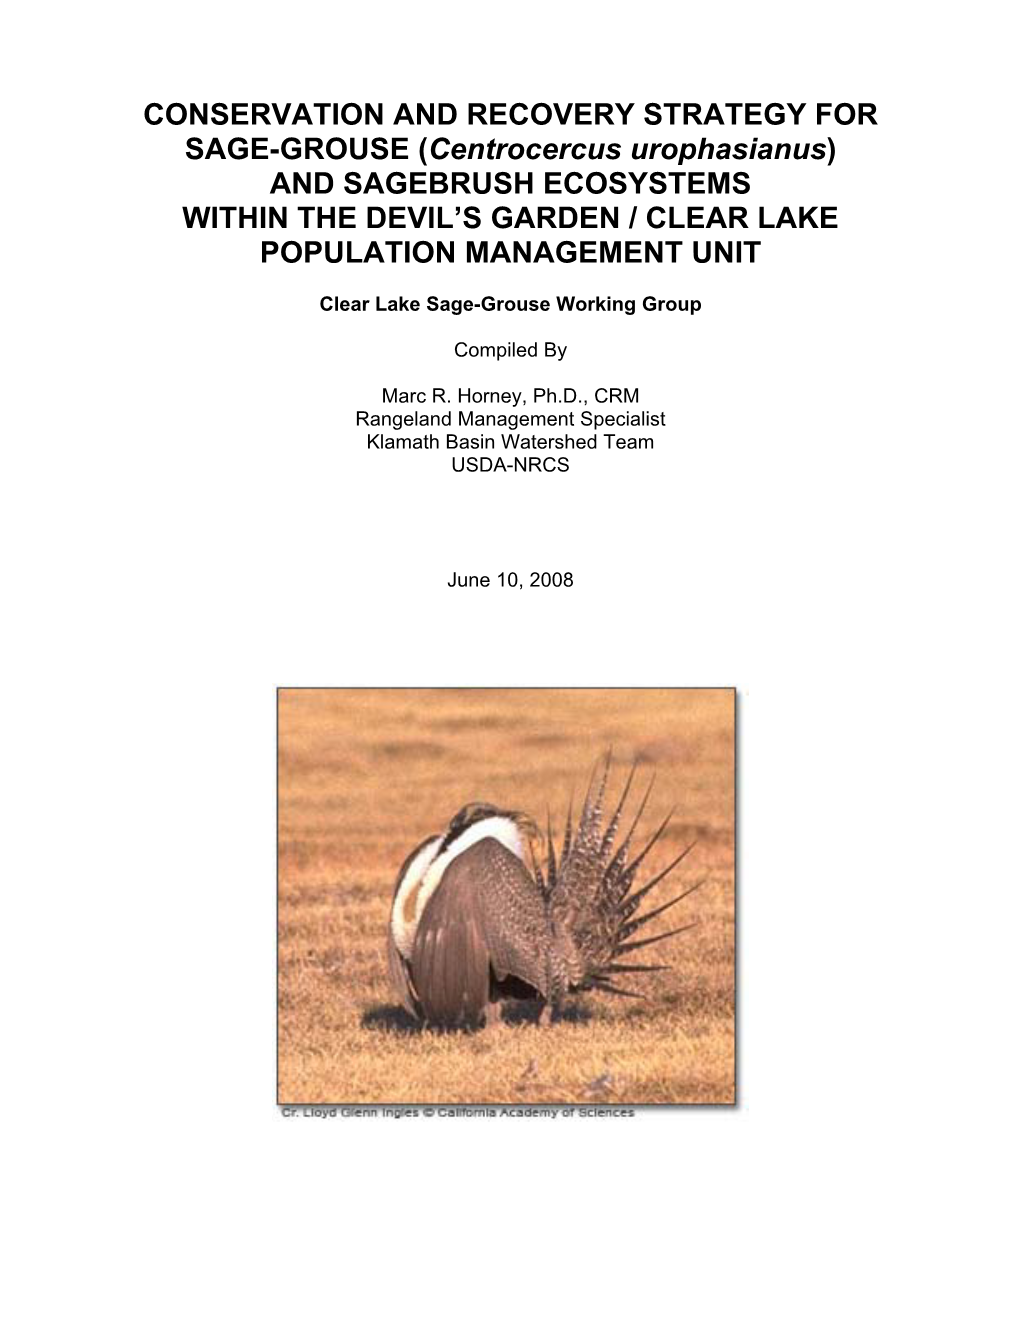 Conservation and Recovery Strategy for Sage-Grouse